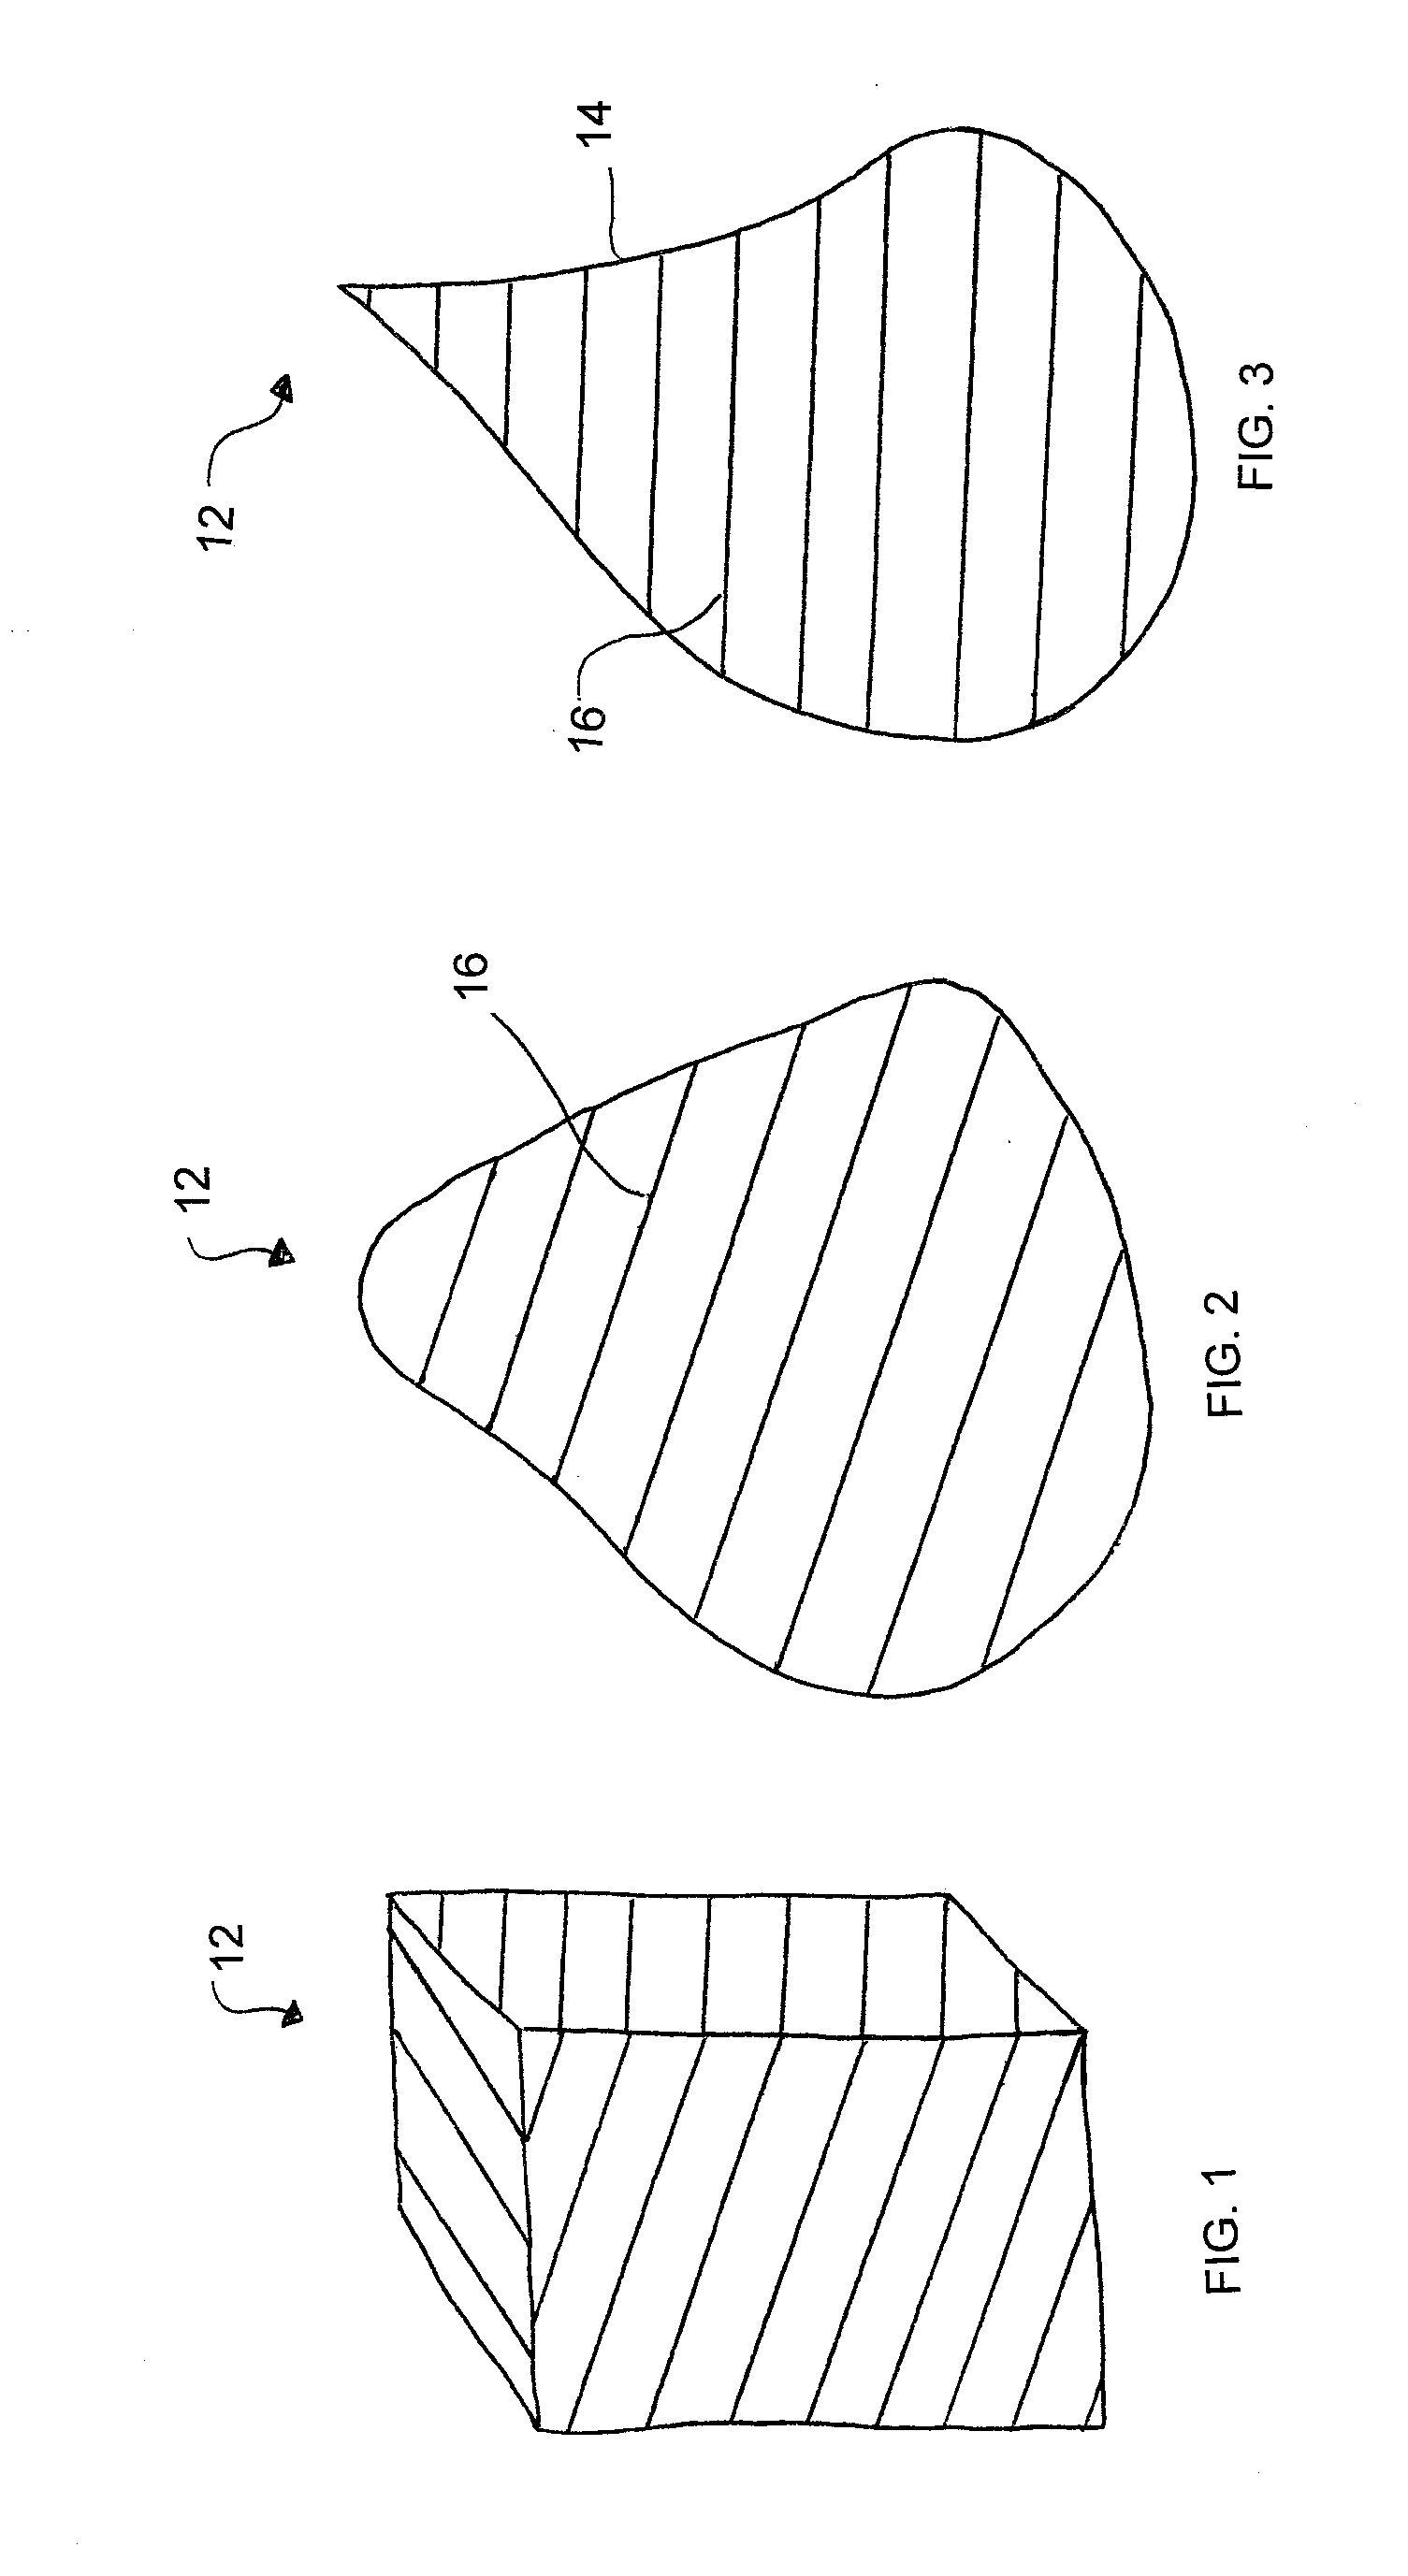 Method of Forming a Breast Prosthesis